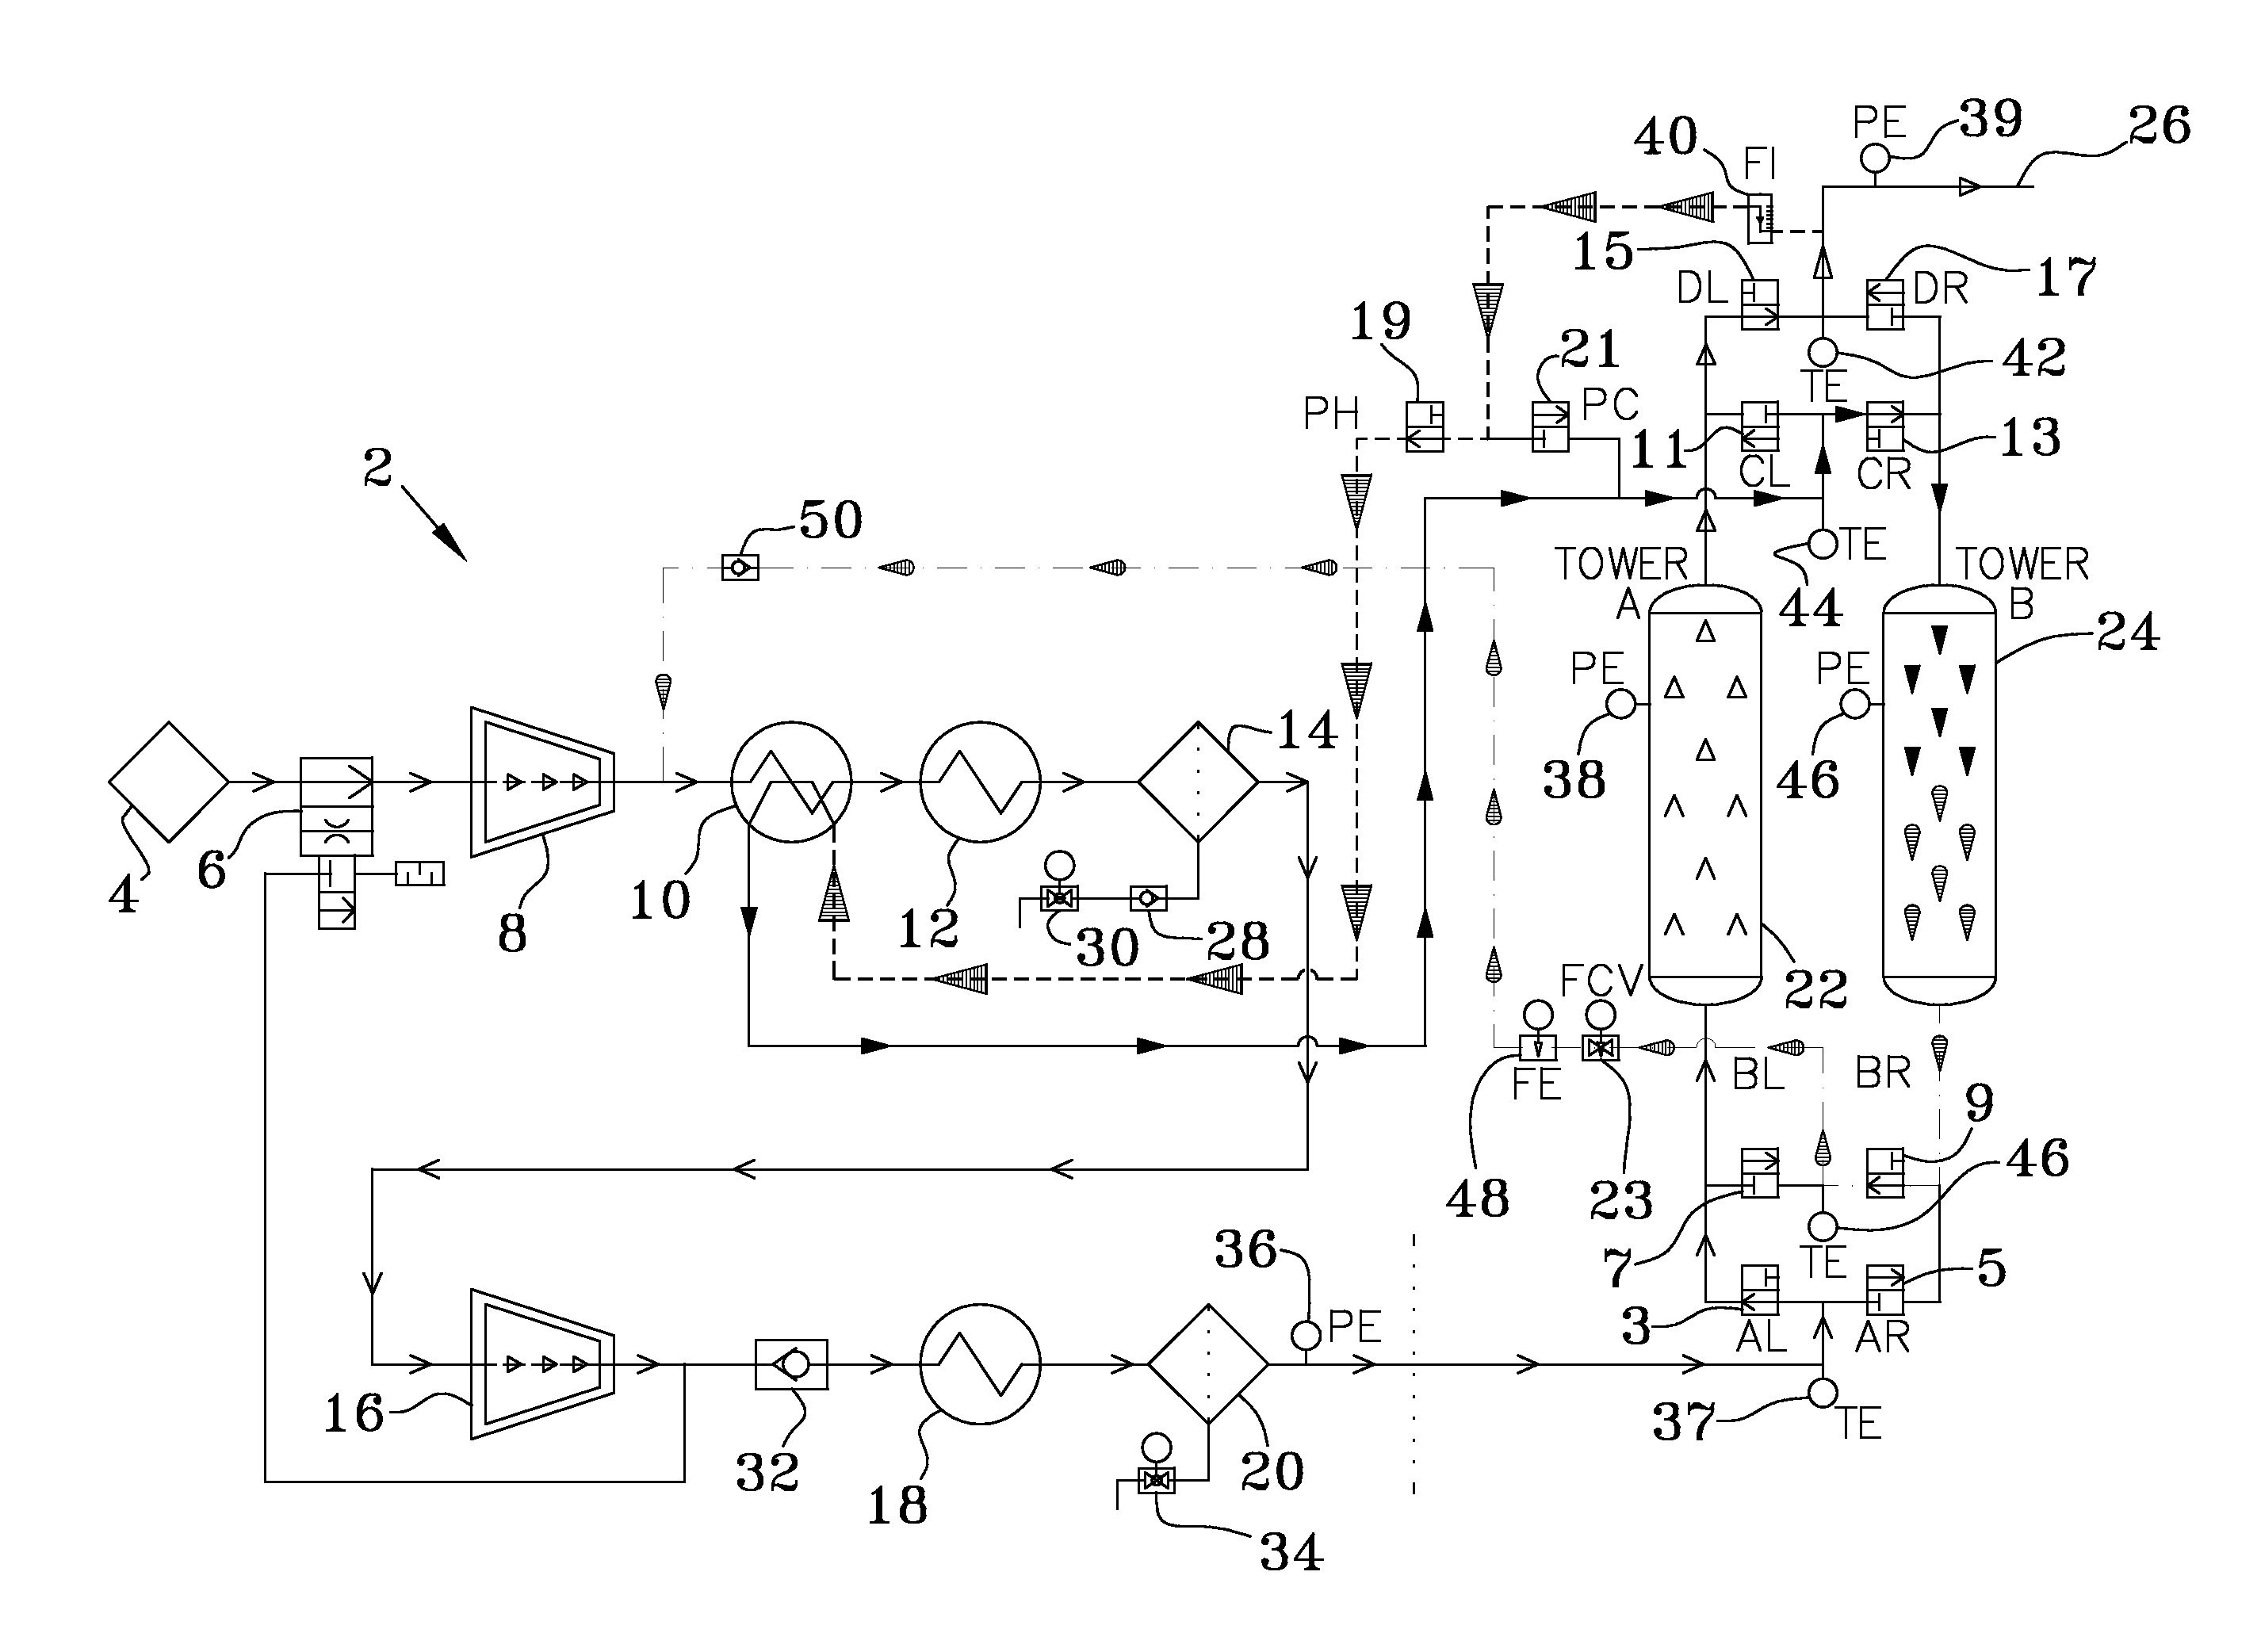 Recycled purge air dryer system and method of use